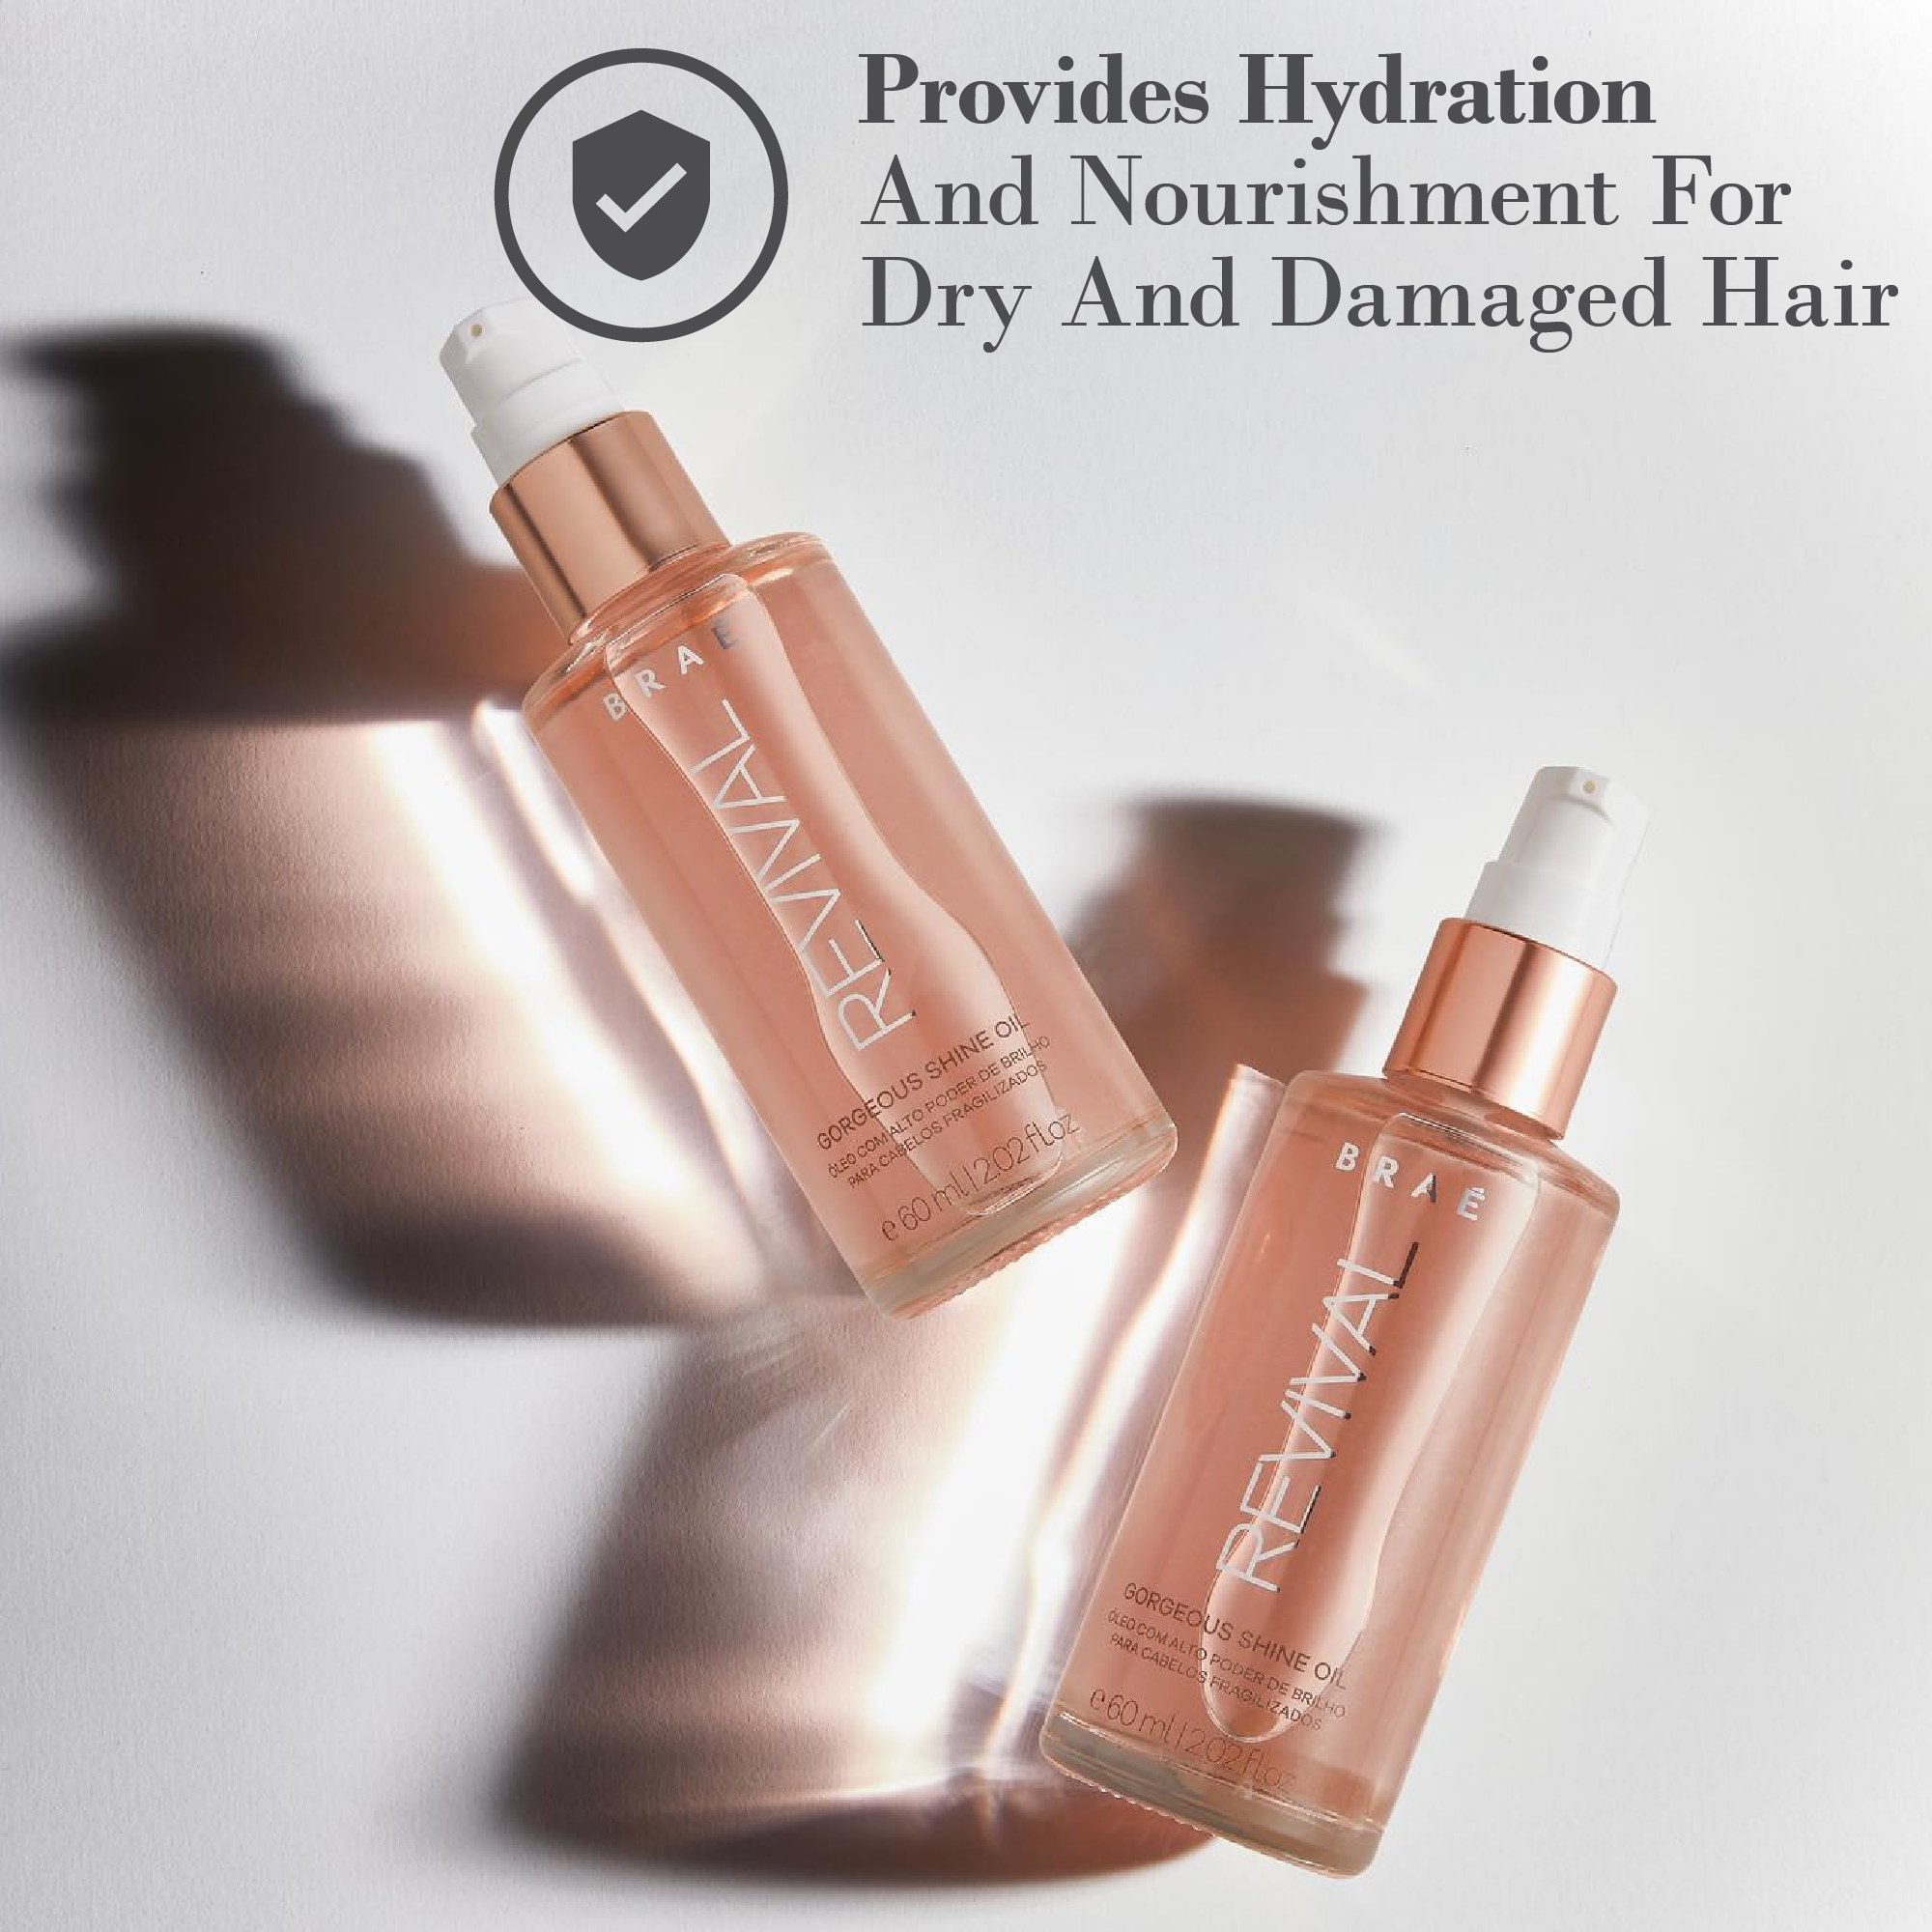 Revival total hair recovery set